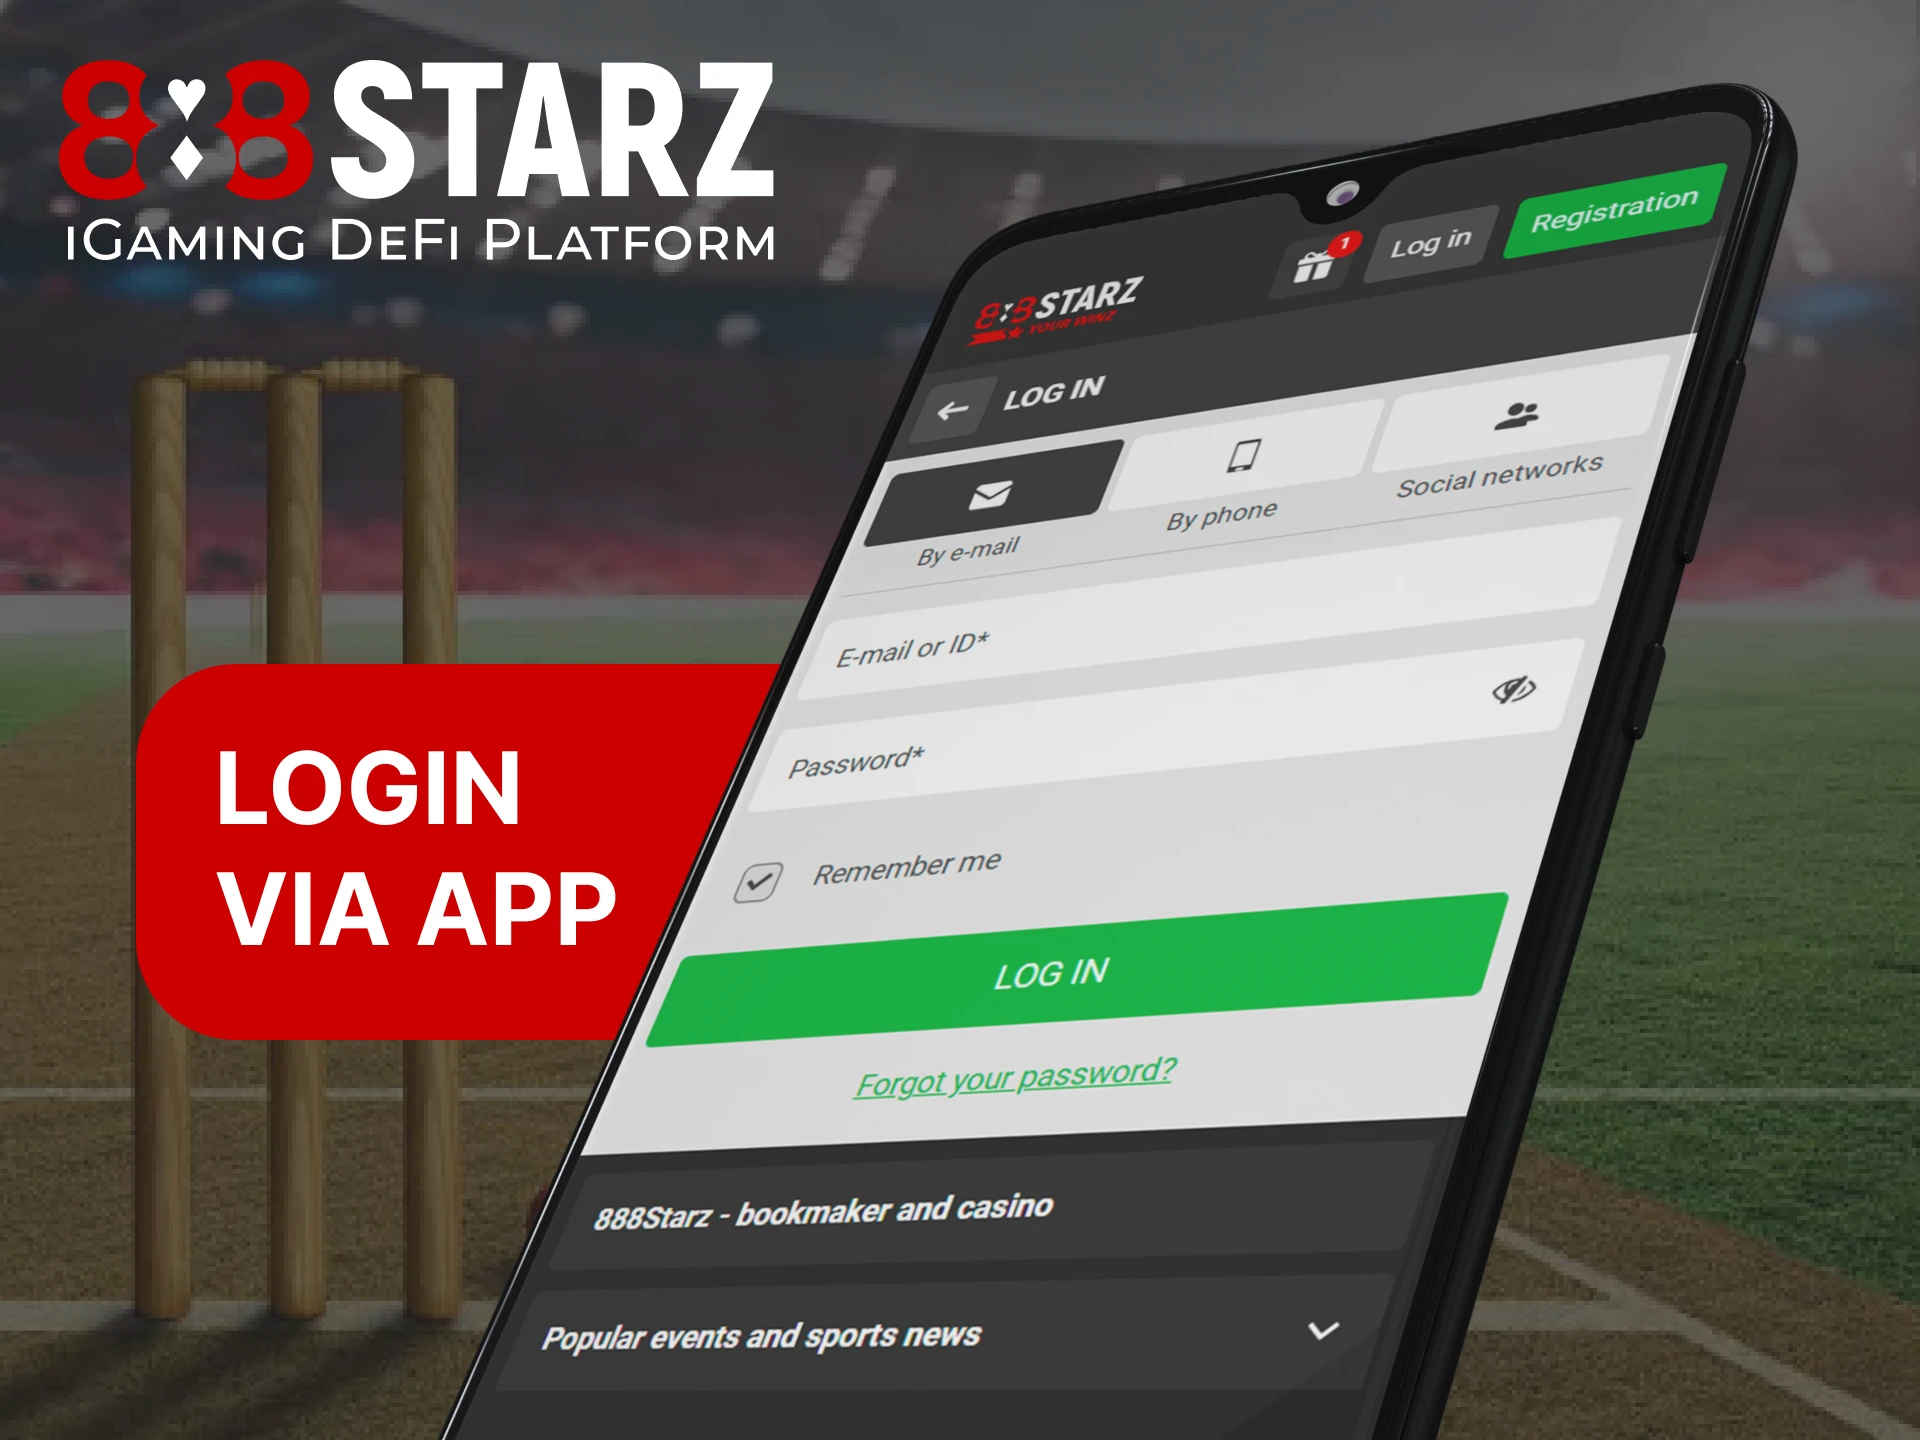 Log into your account using the 88Starz mobile app.